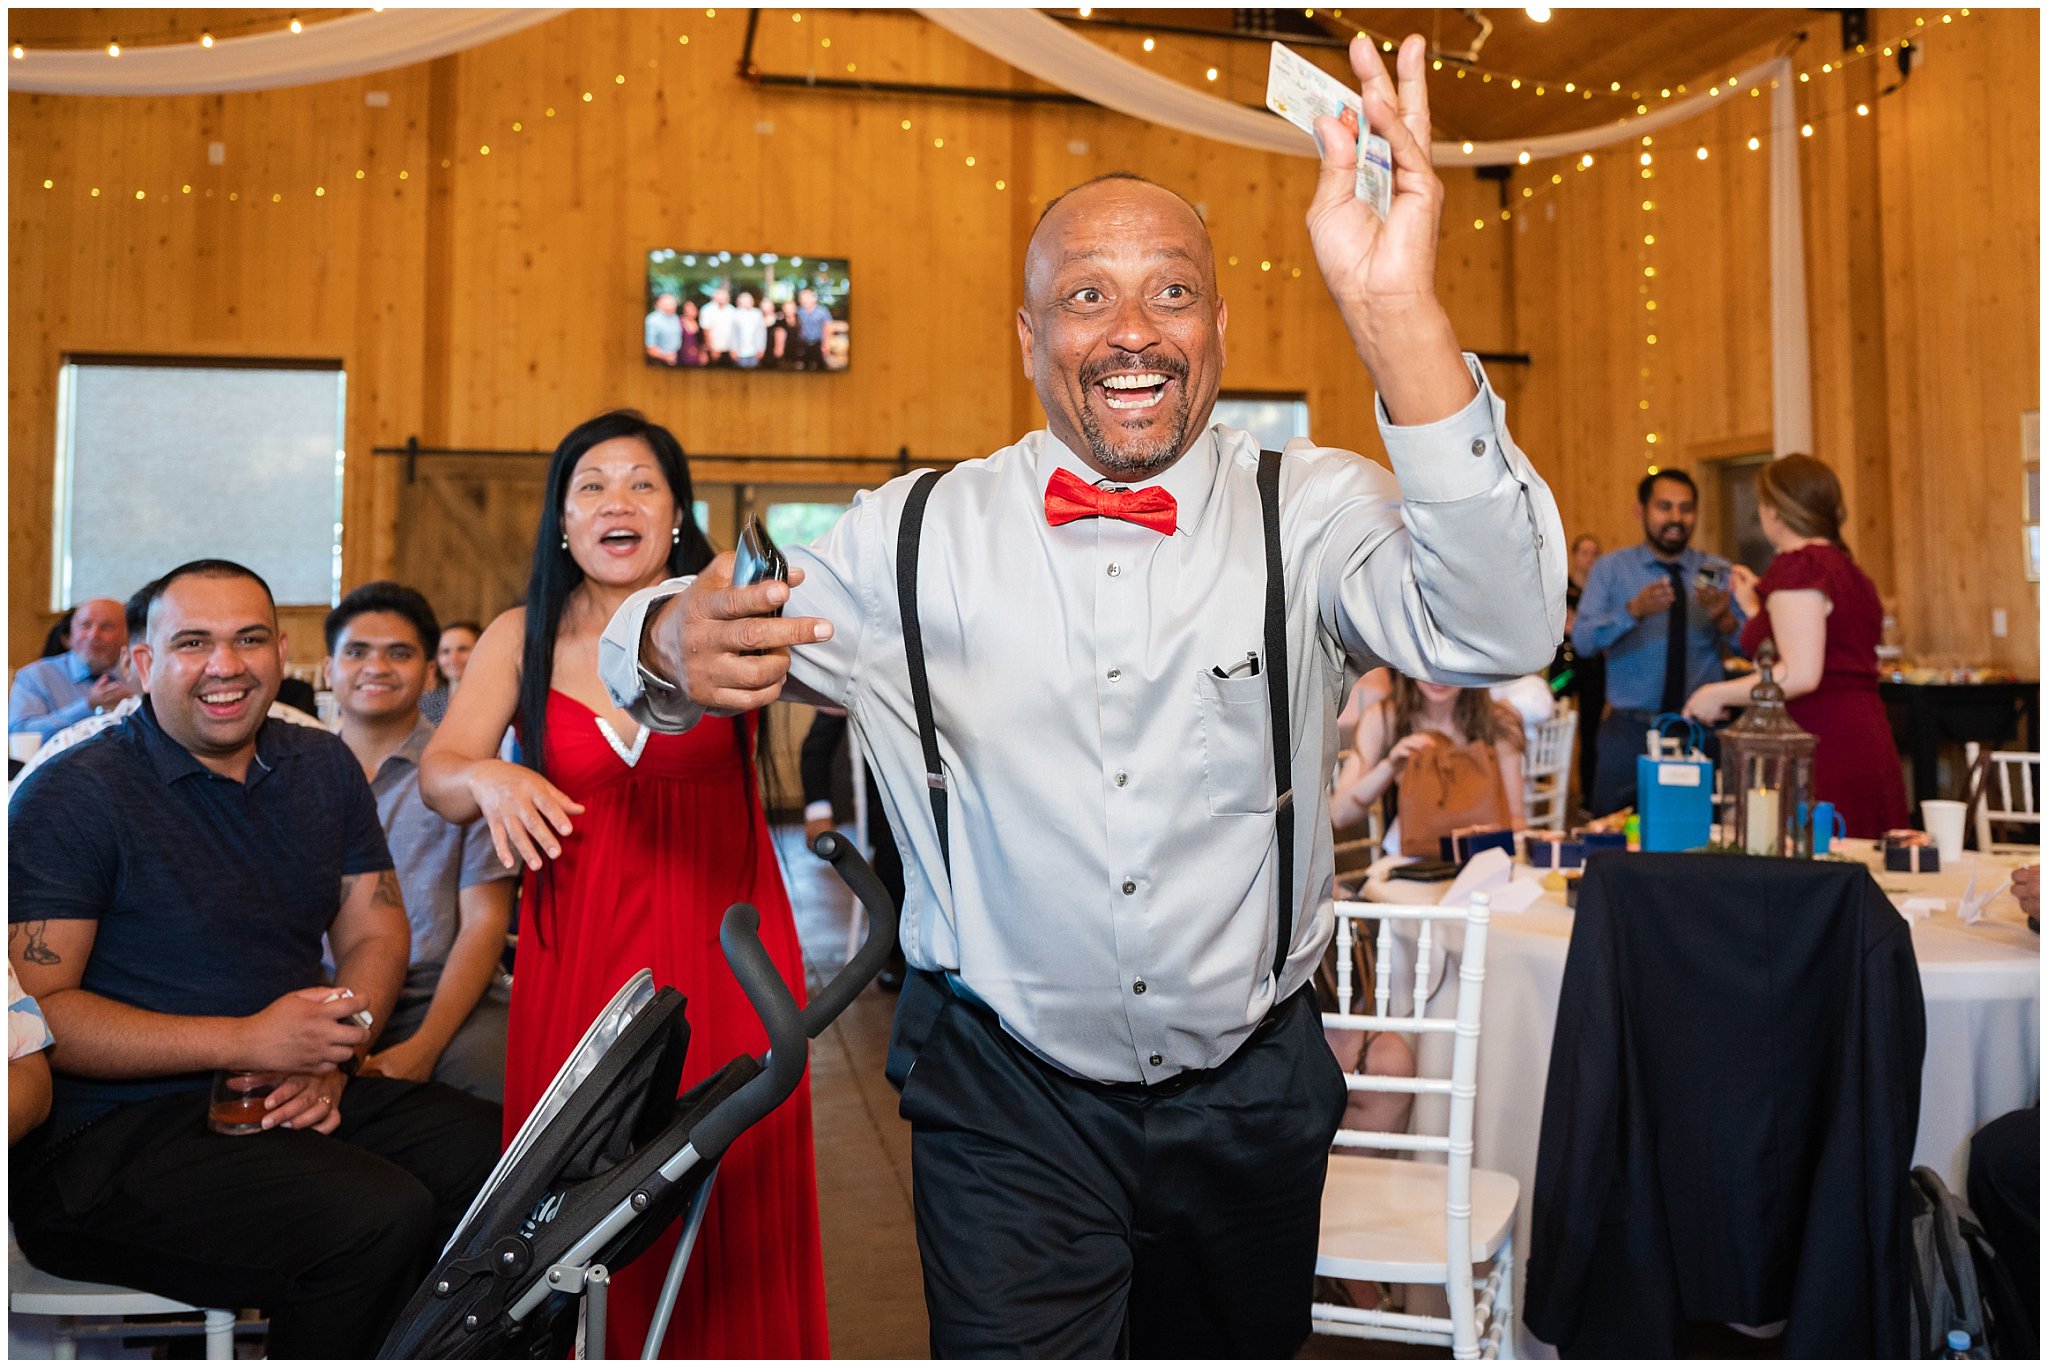 Wedding reception game ideas and scavenger hunt musical chairs | Oak Hills Utah Destination Wedding | Jessie and Dallin Photography